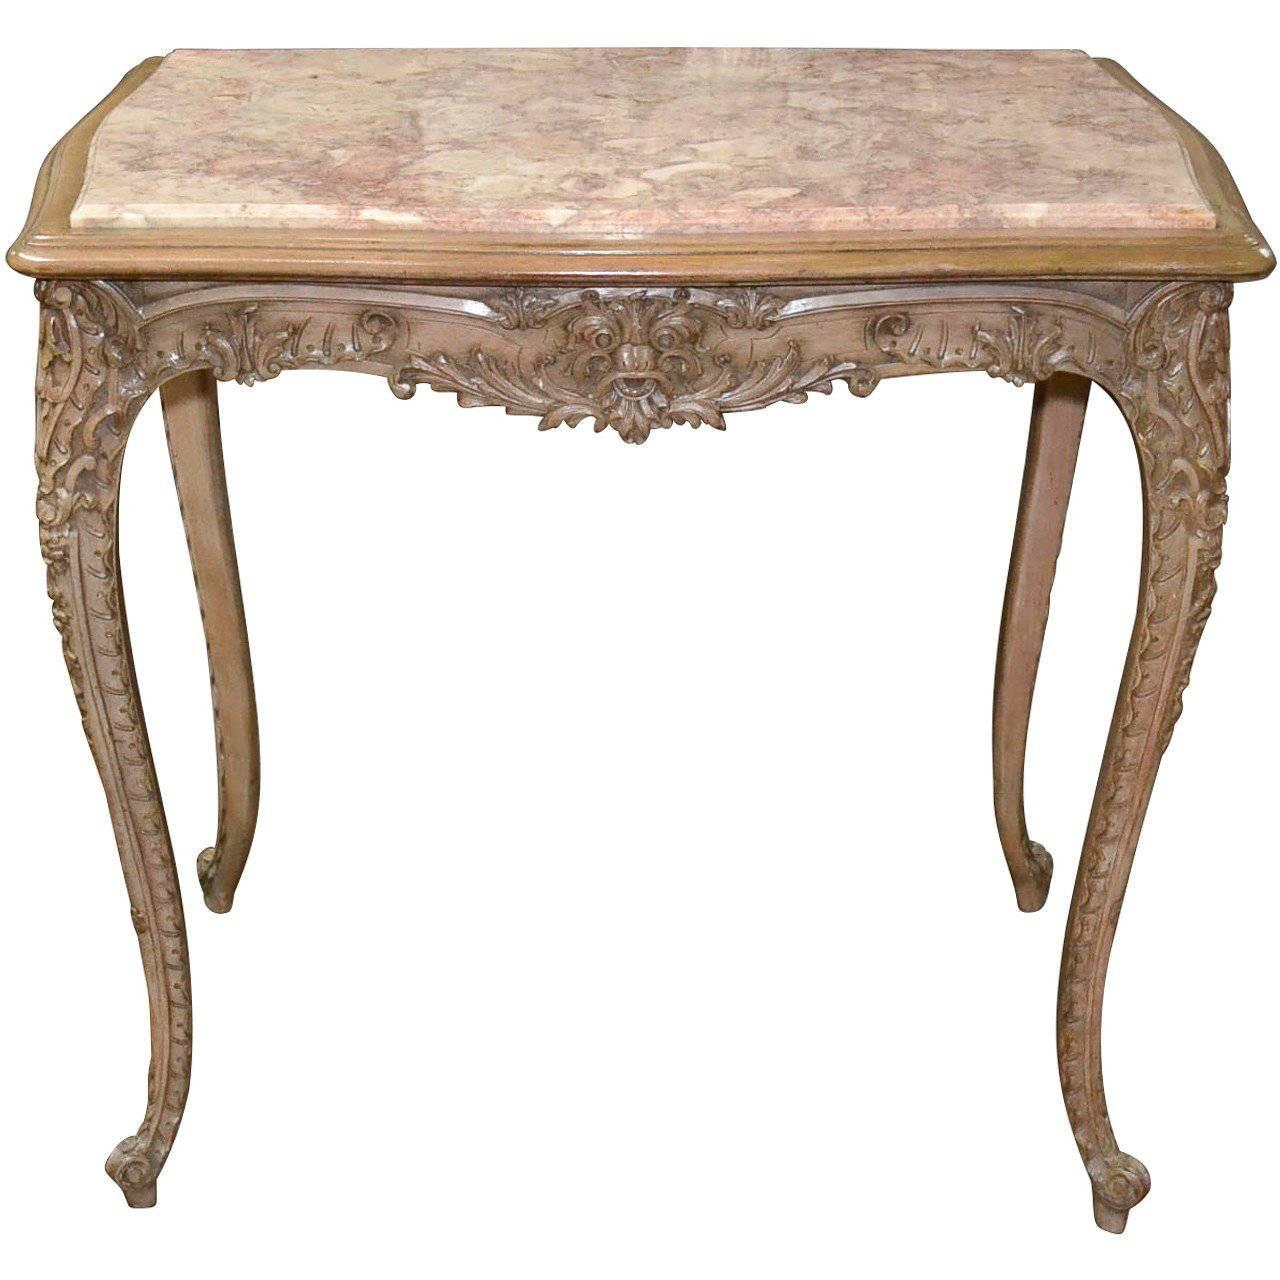 19th Century French Carved and Lacquered Salon Table